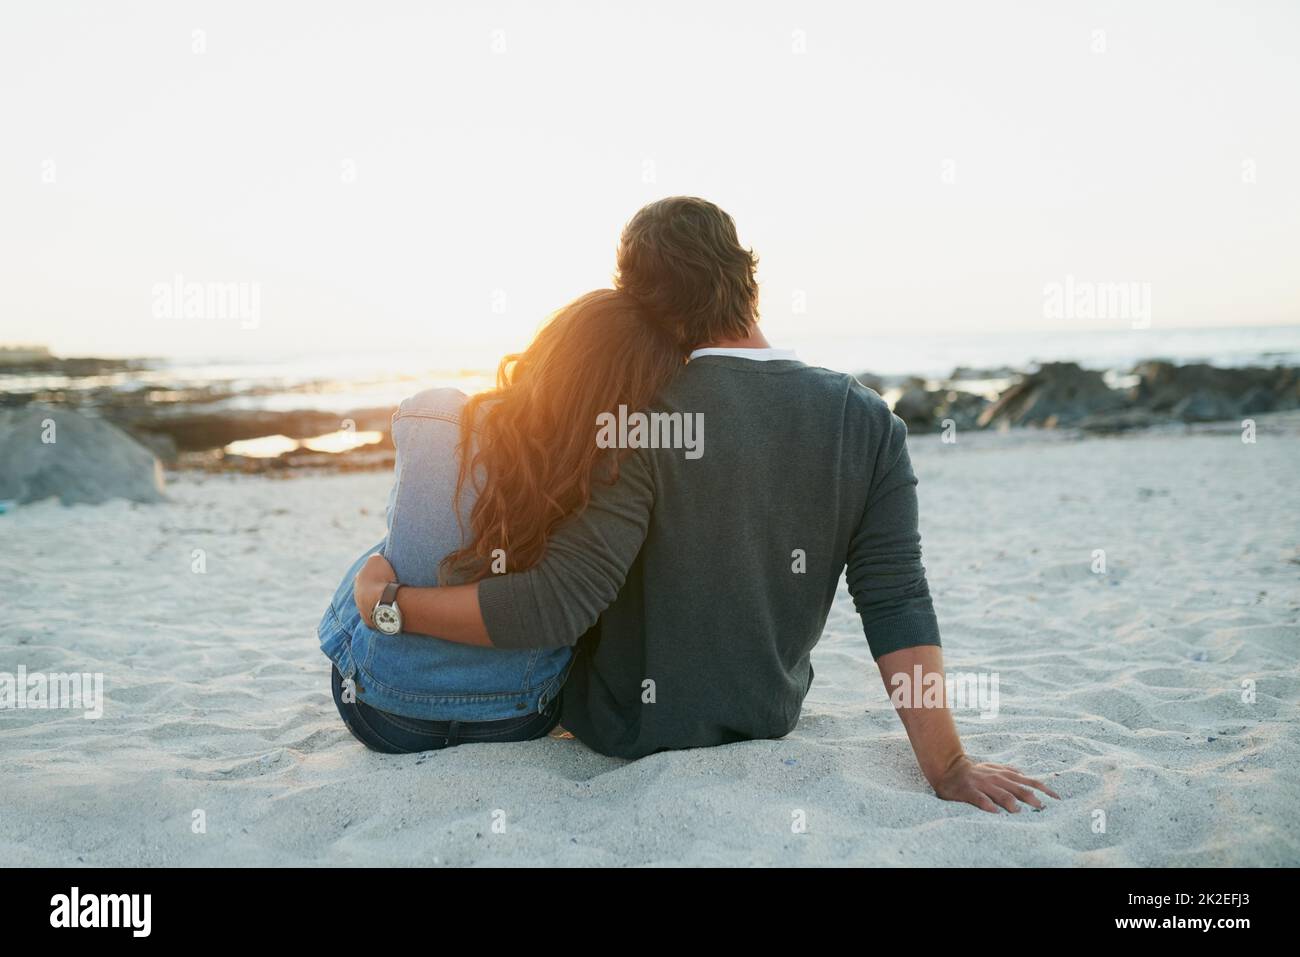 Cherishing these special moments. Rearview shot of an affectionate young couple bonding at the beach. Stock Photo